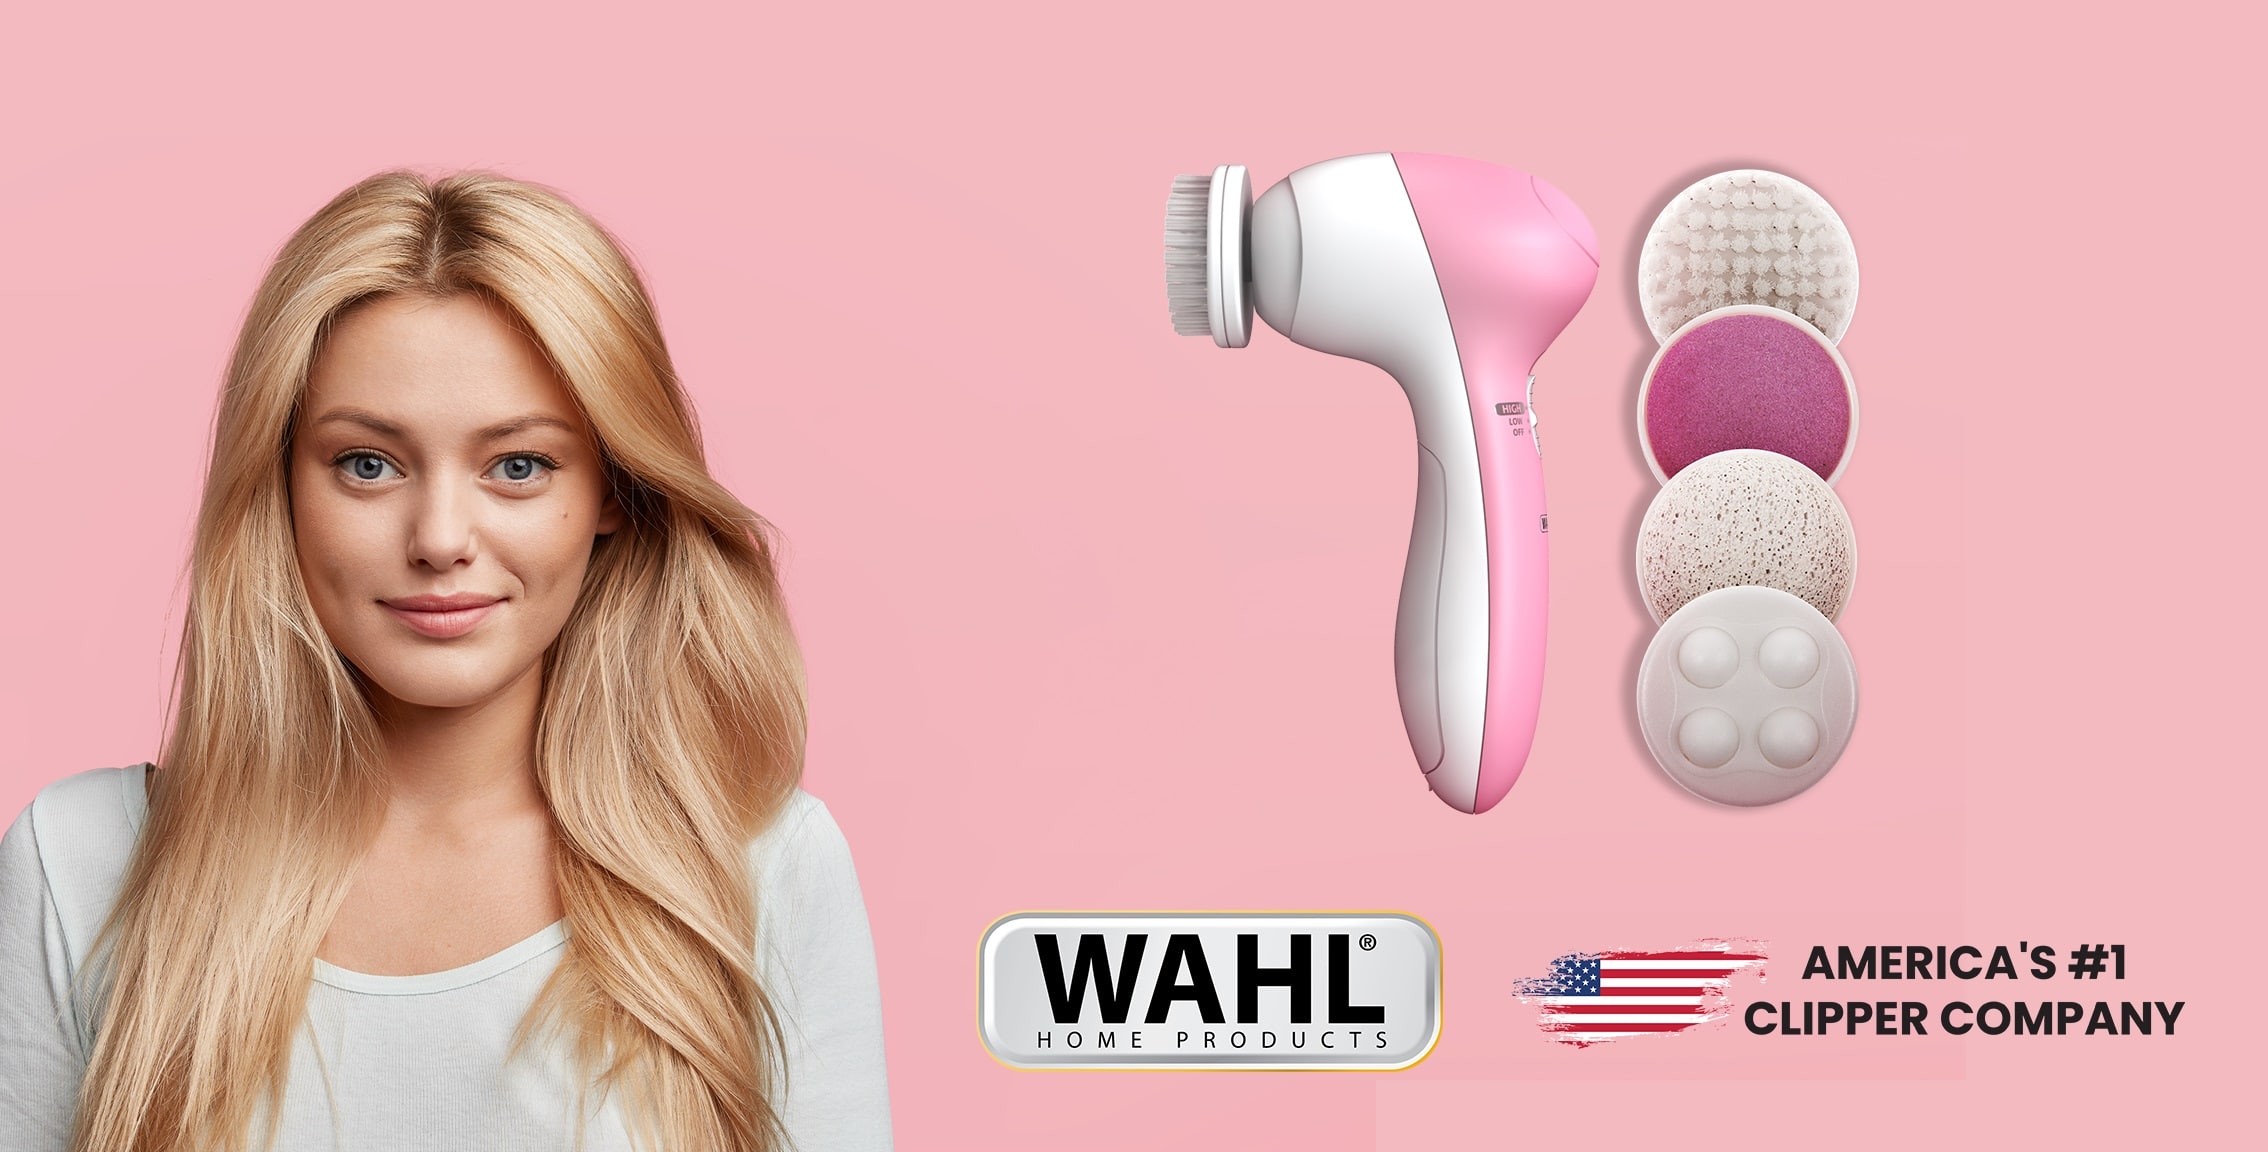 Wahl Pure Confidence